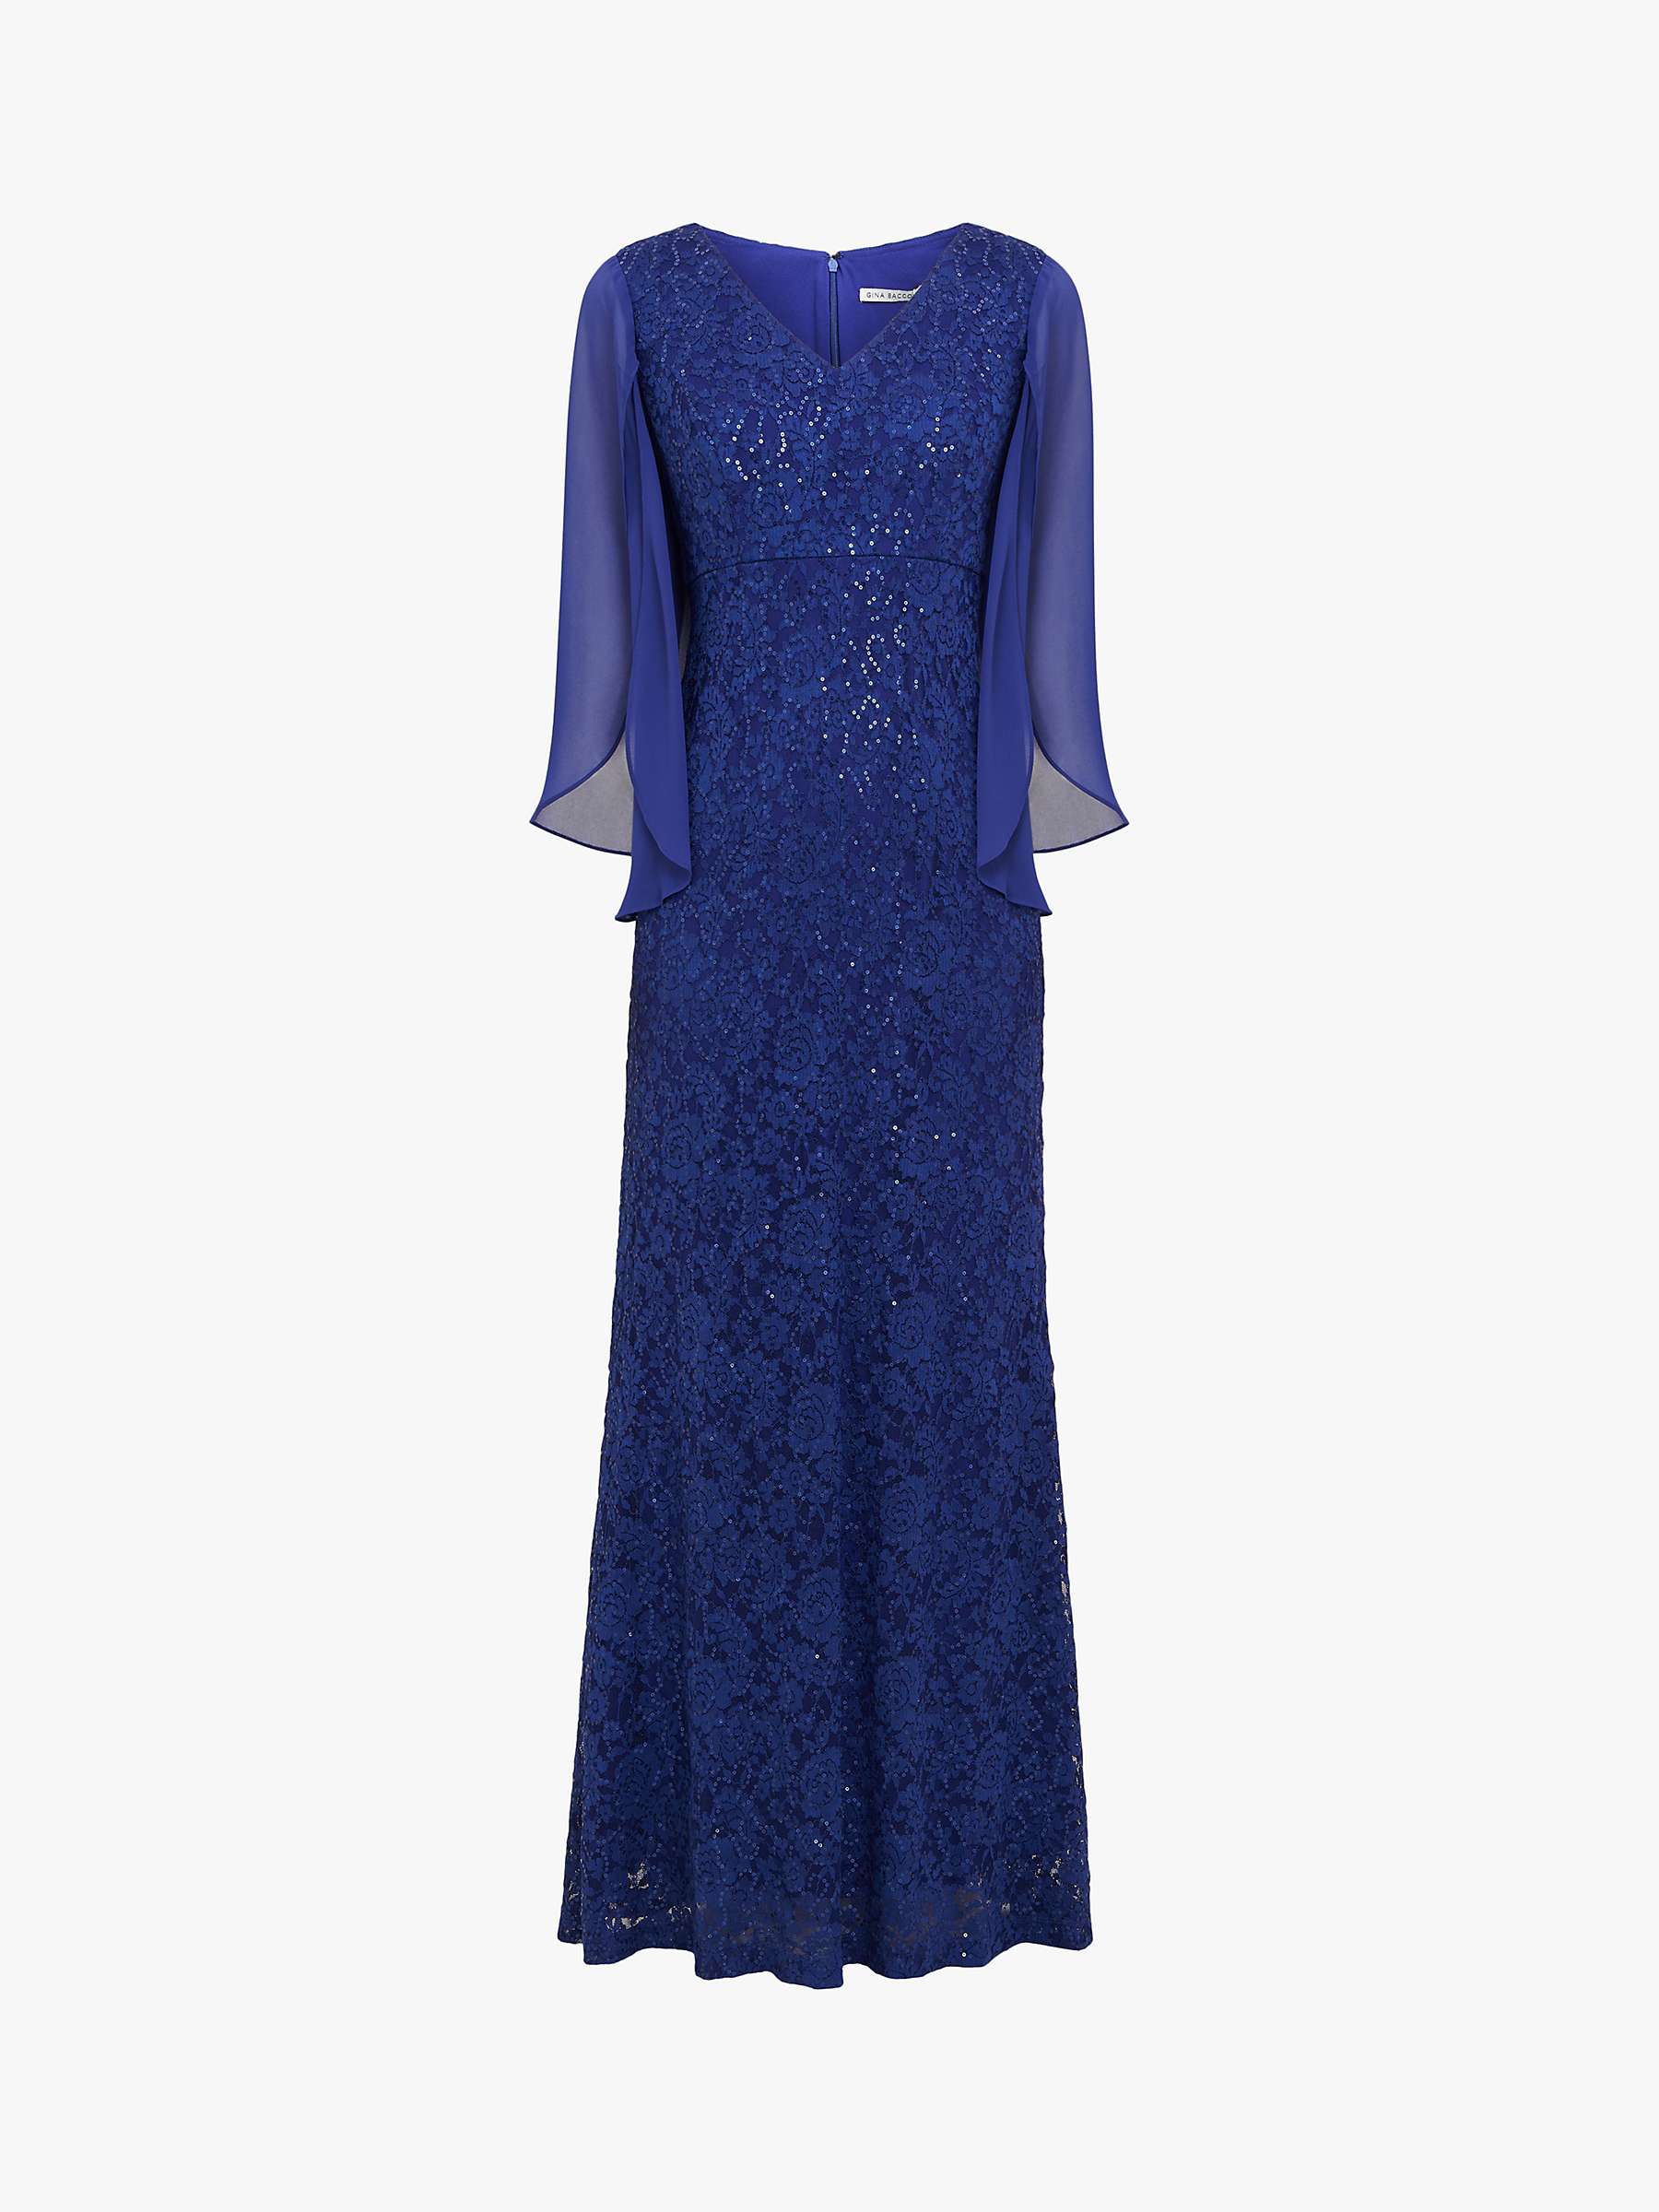 Buy Gina Bacconi Claudine Sequin Maxi Dress, Royal Online at johnlewis.com